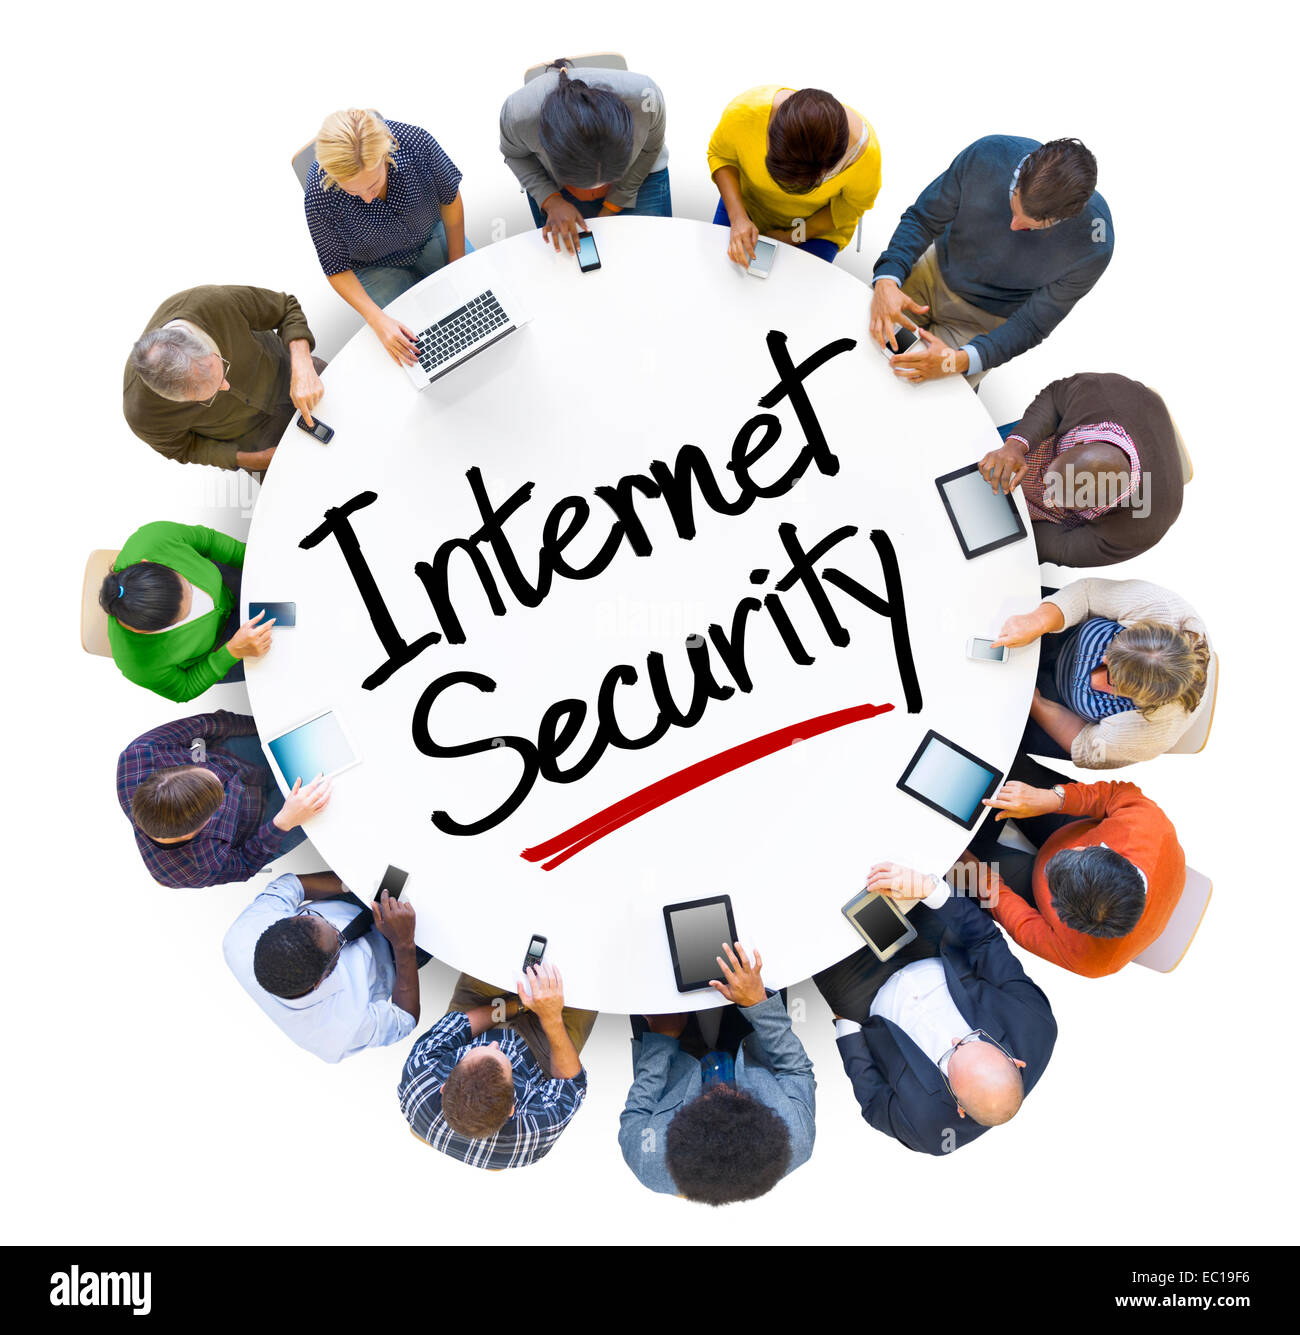 Multi-Ethnic Group of People and Internet Security Concept Stock Photo